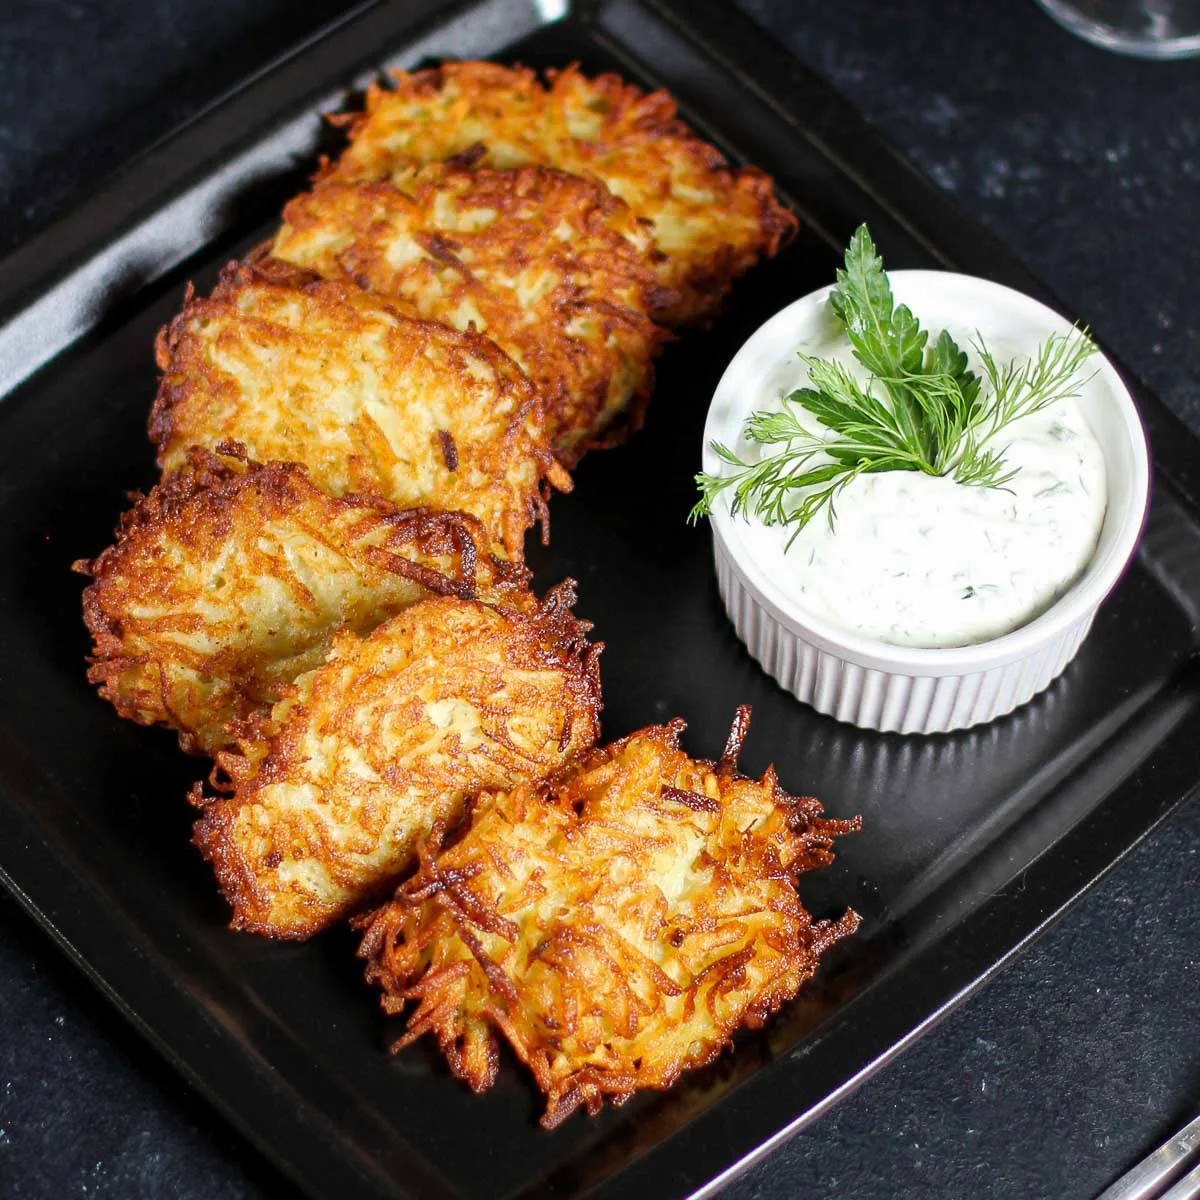 Plate of latkes with a bowl of sour cream